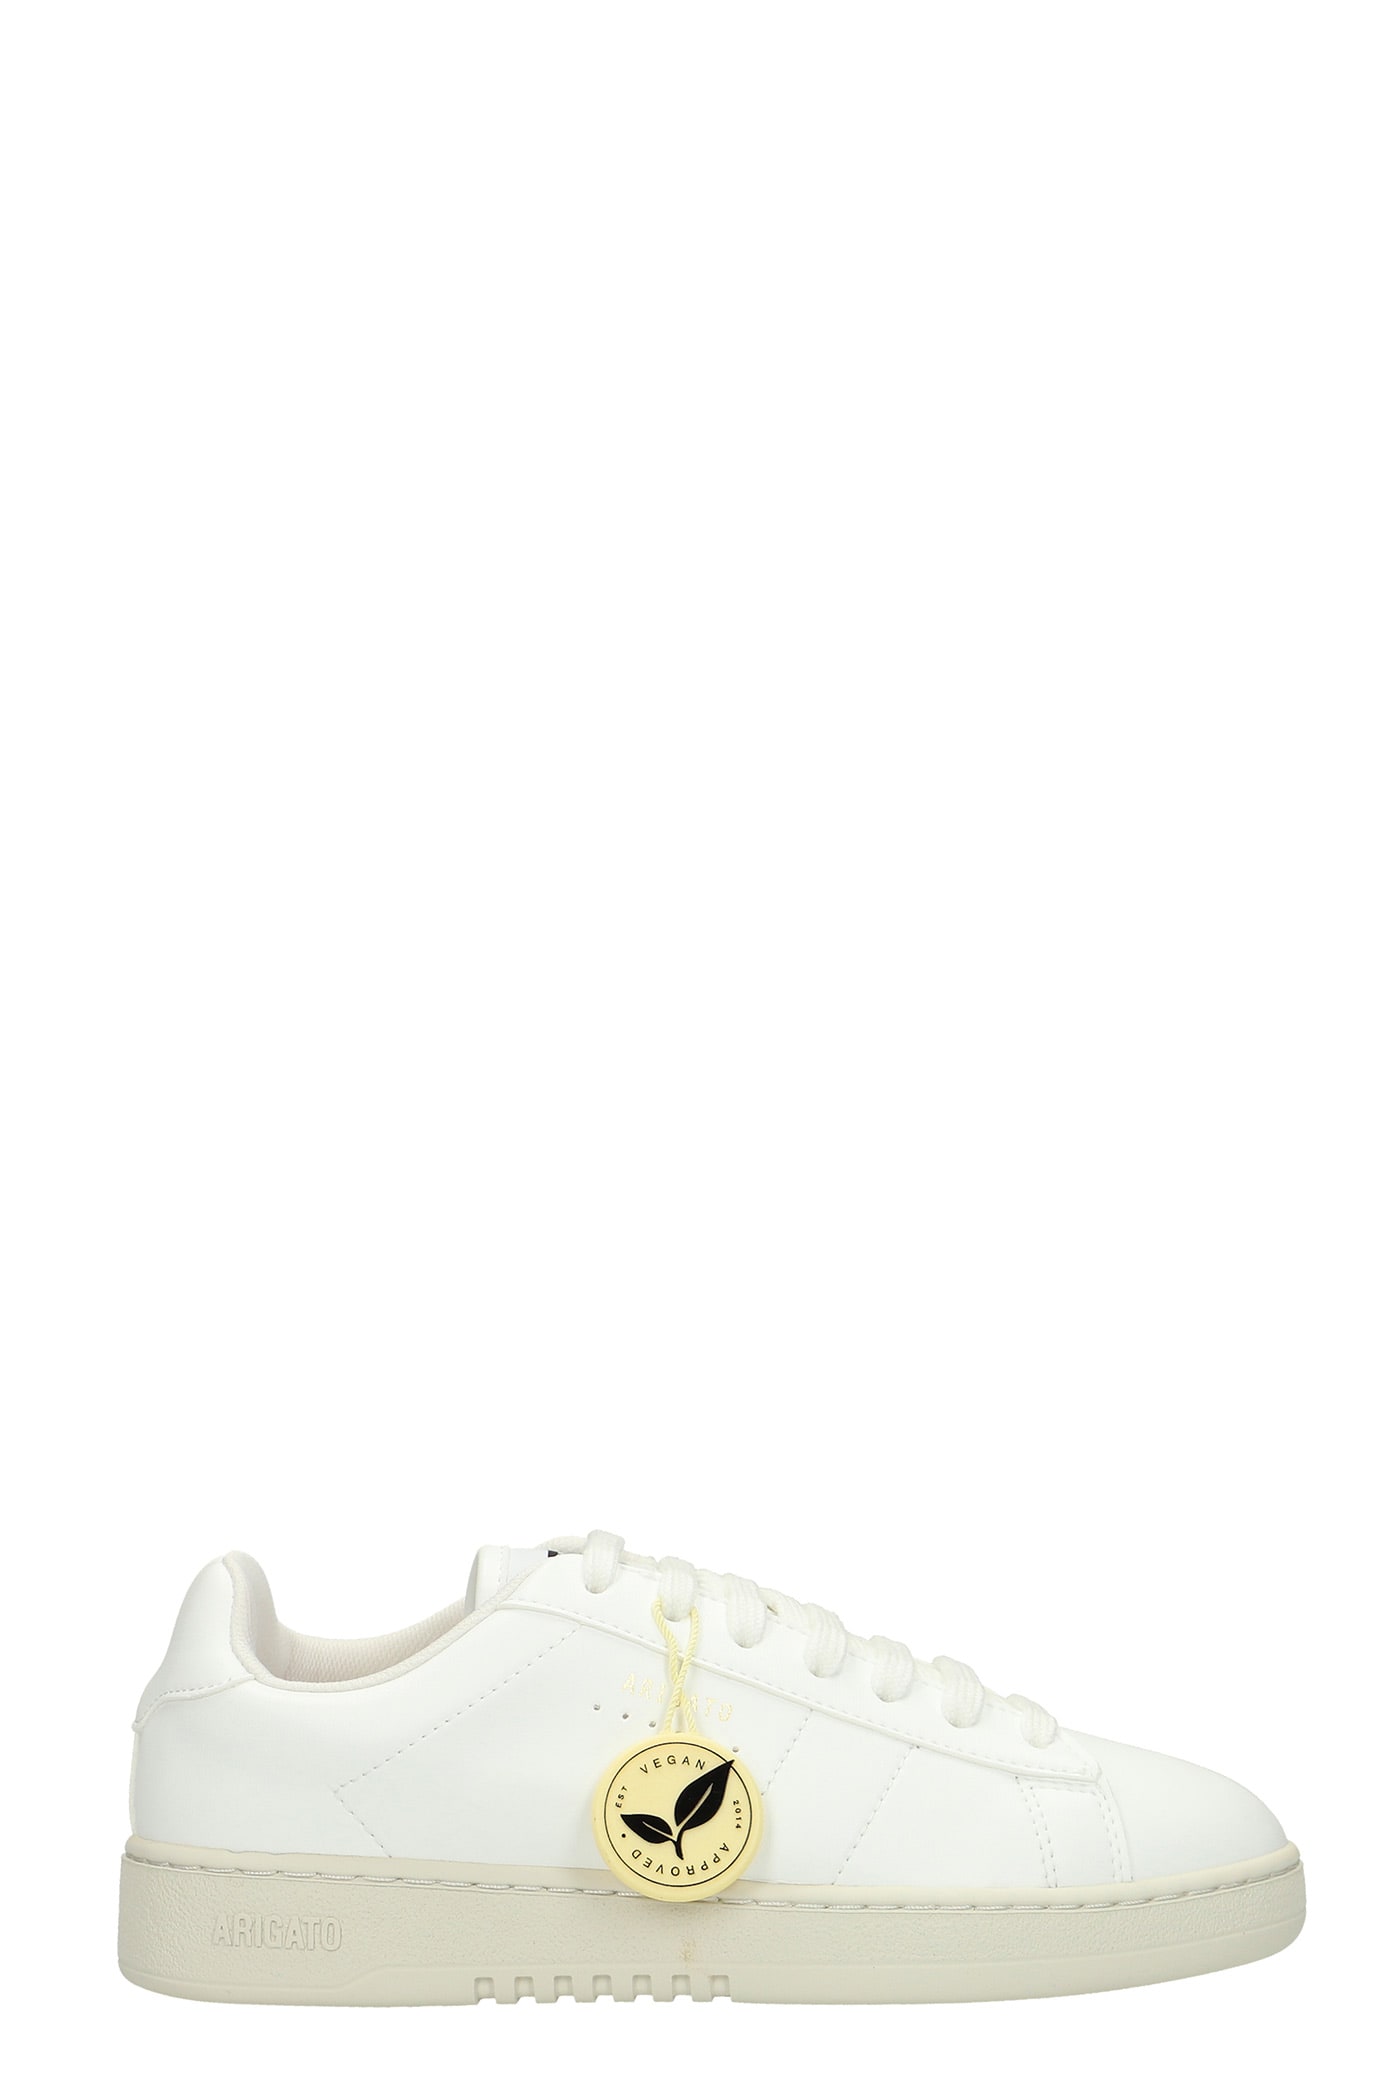 Axel Arigato Hooper Sneakers In White Leather